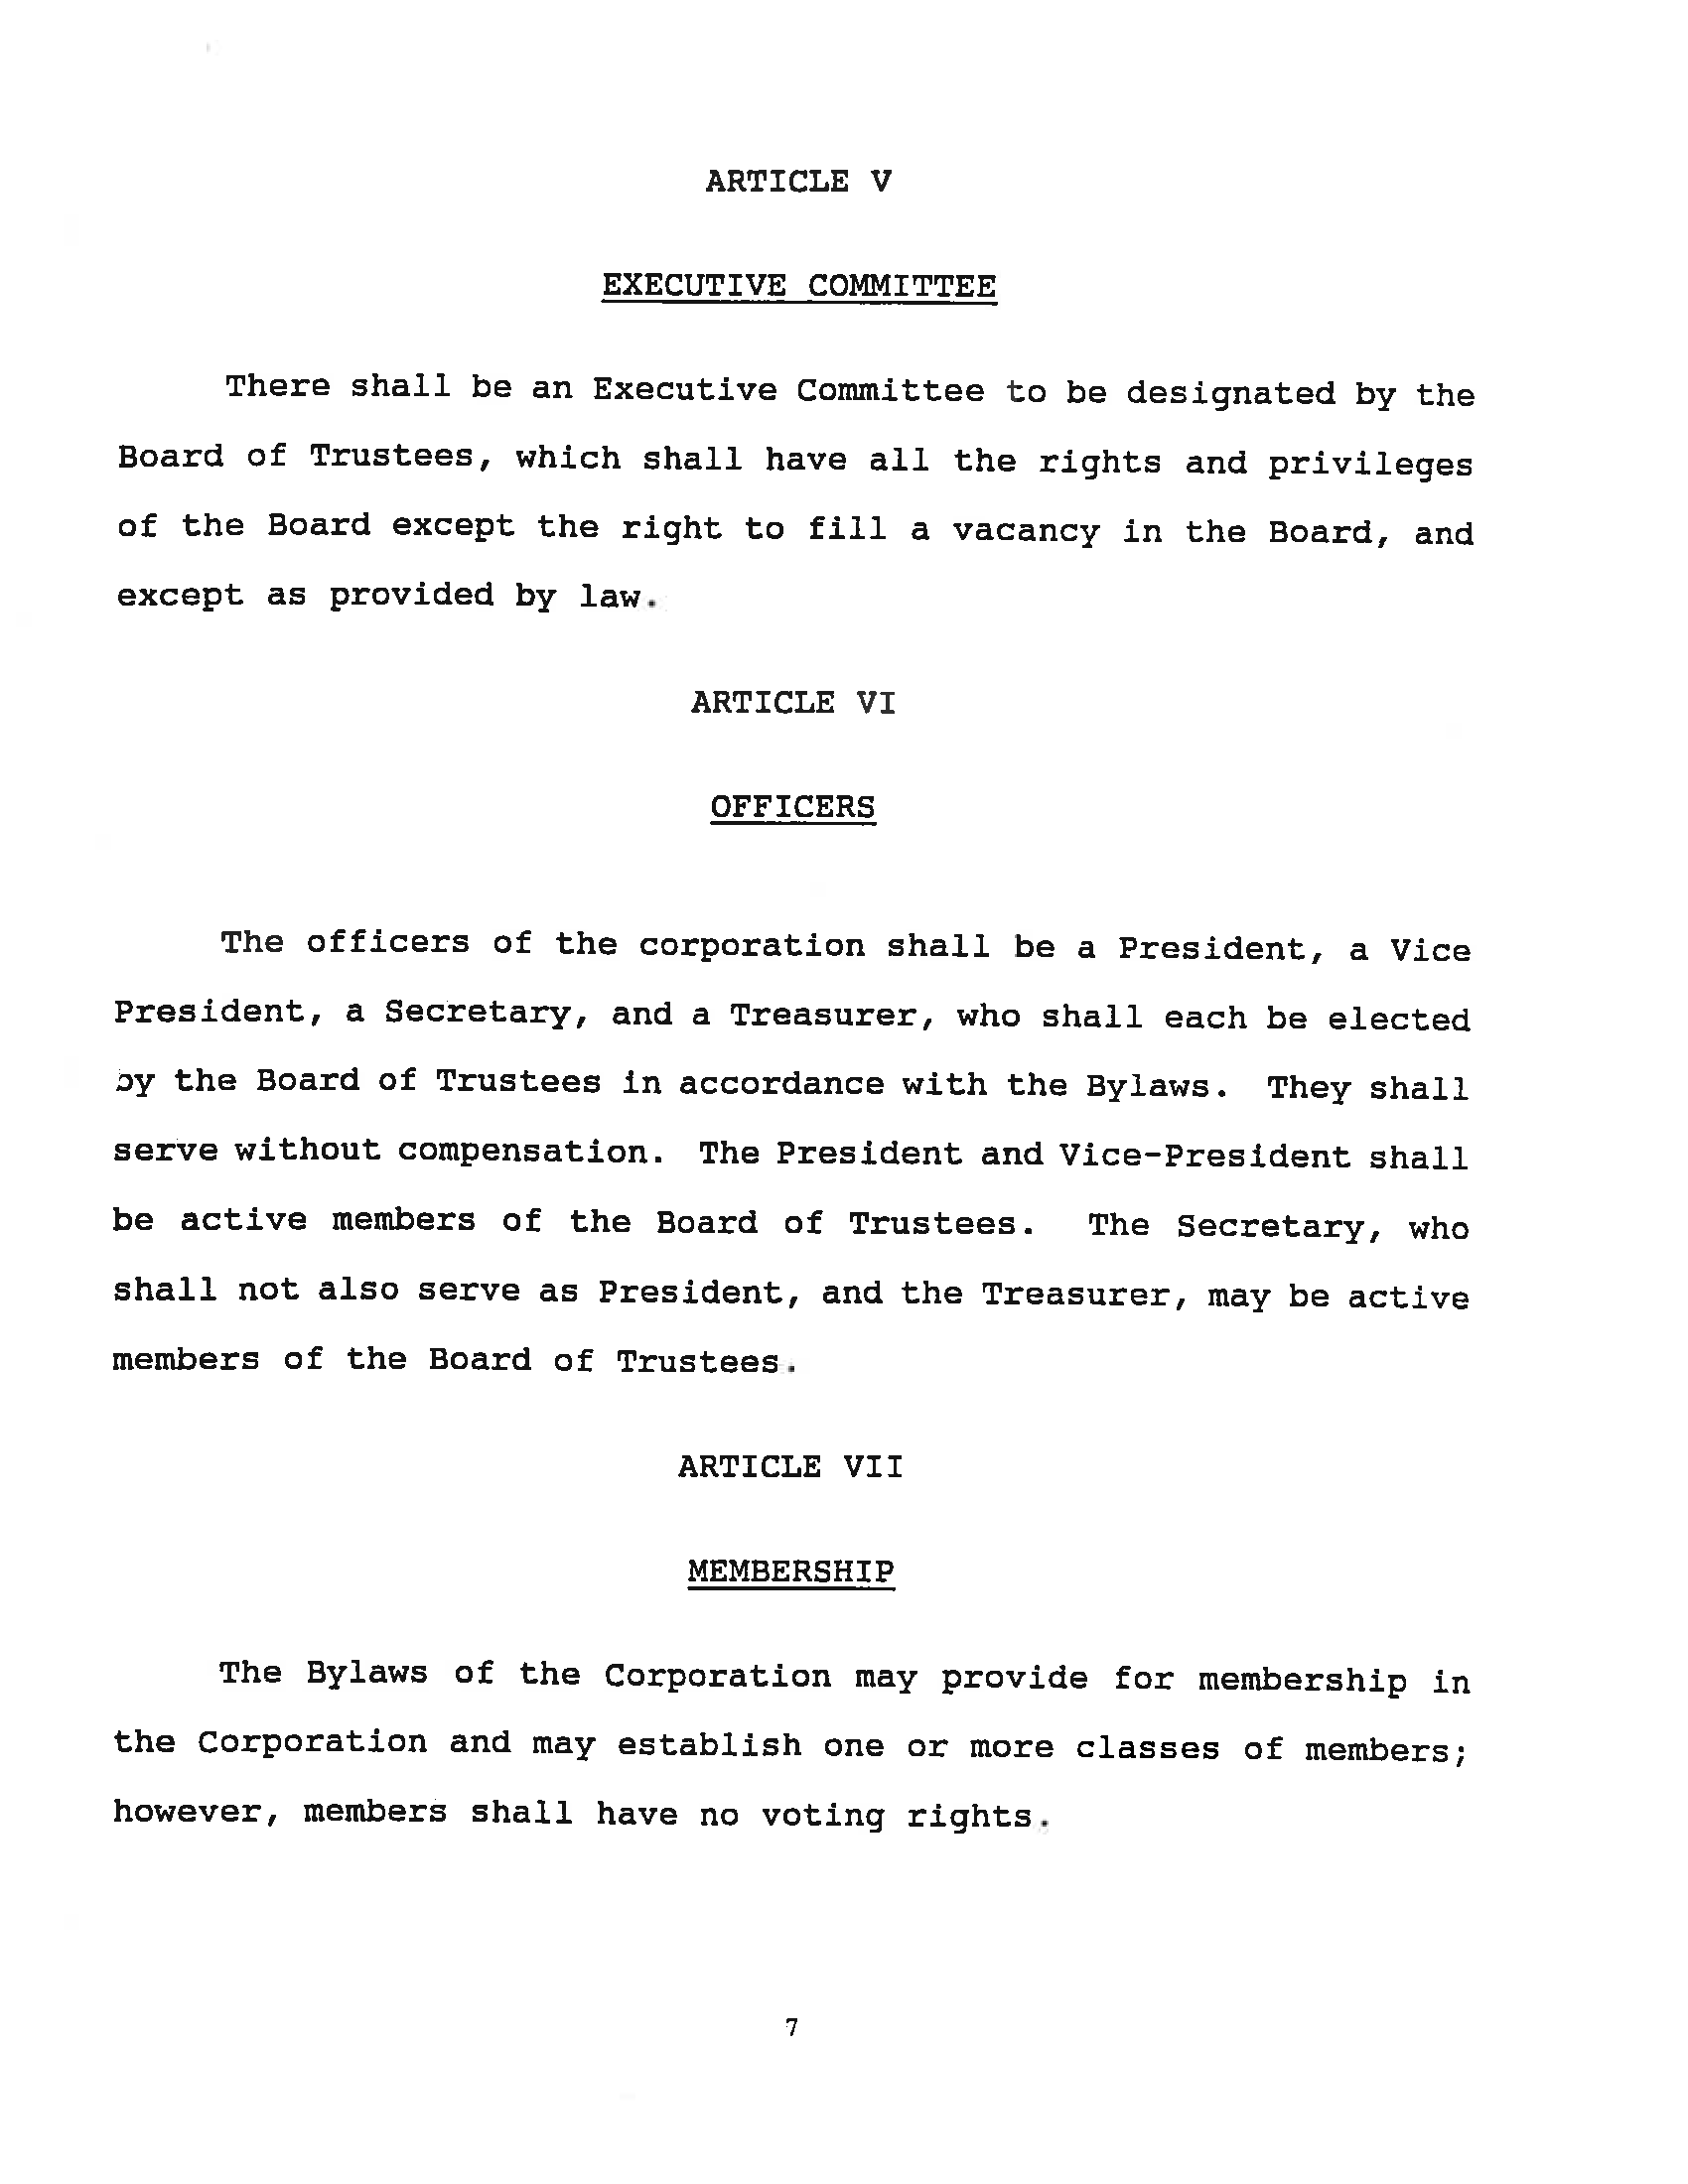 Menokin Foundation Articles of Incorporation_Page_09.png